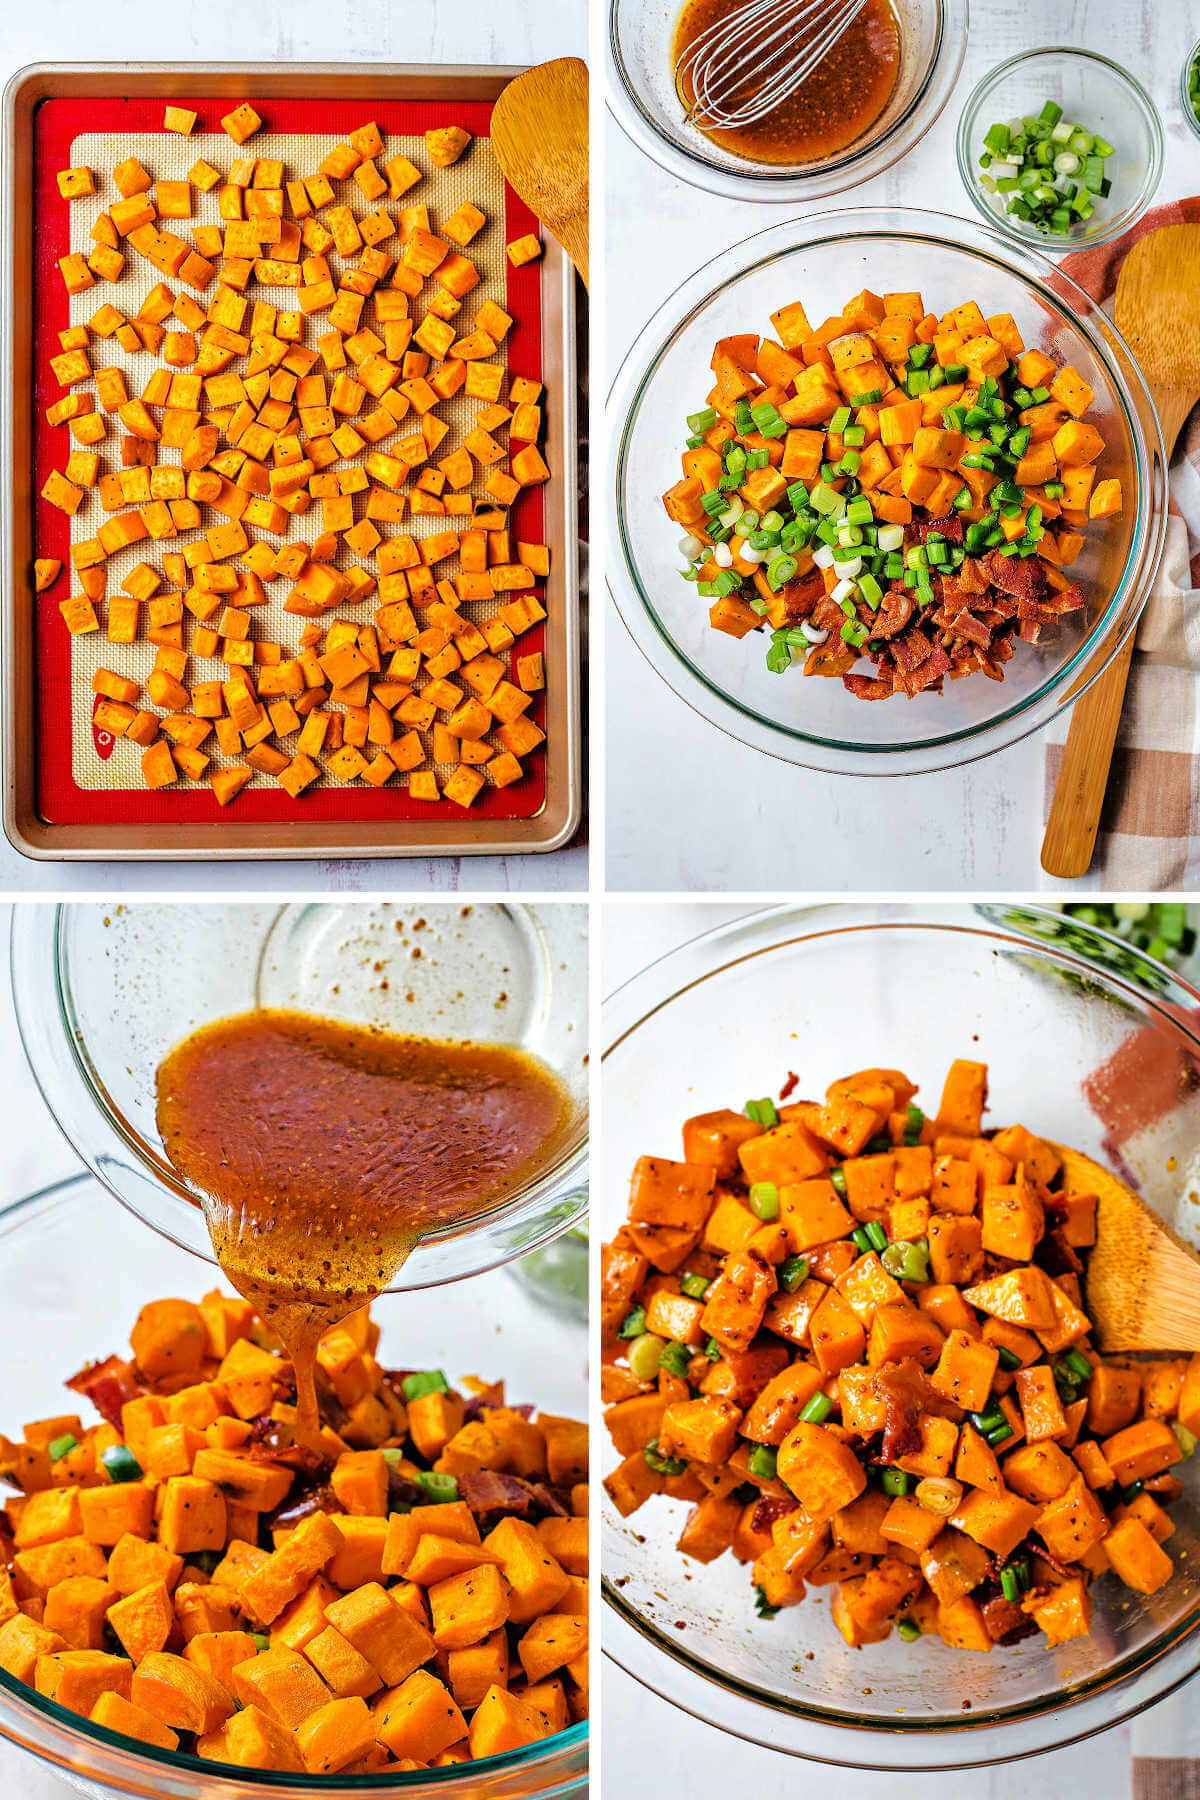 Roasted sweet potatoes in a bowl with vinaigrette being poured on top for sweet potato salad.